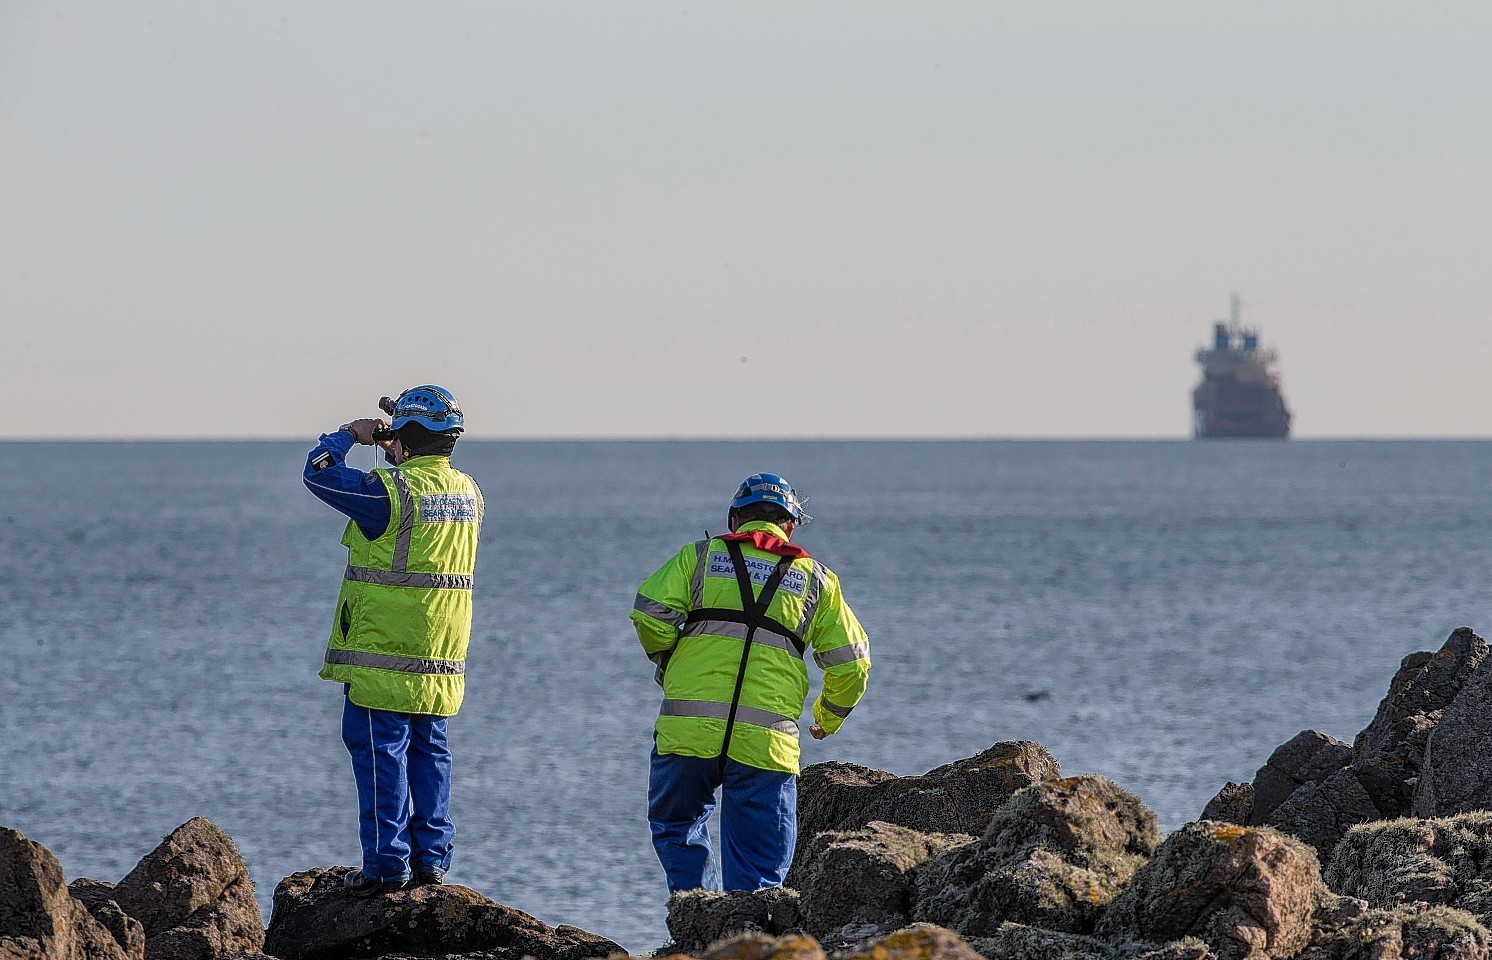 Search for man who fell overboard in the North Sea off the Aberdeen coast